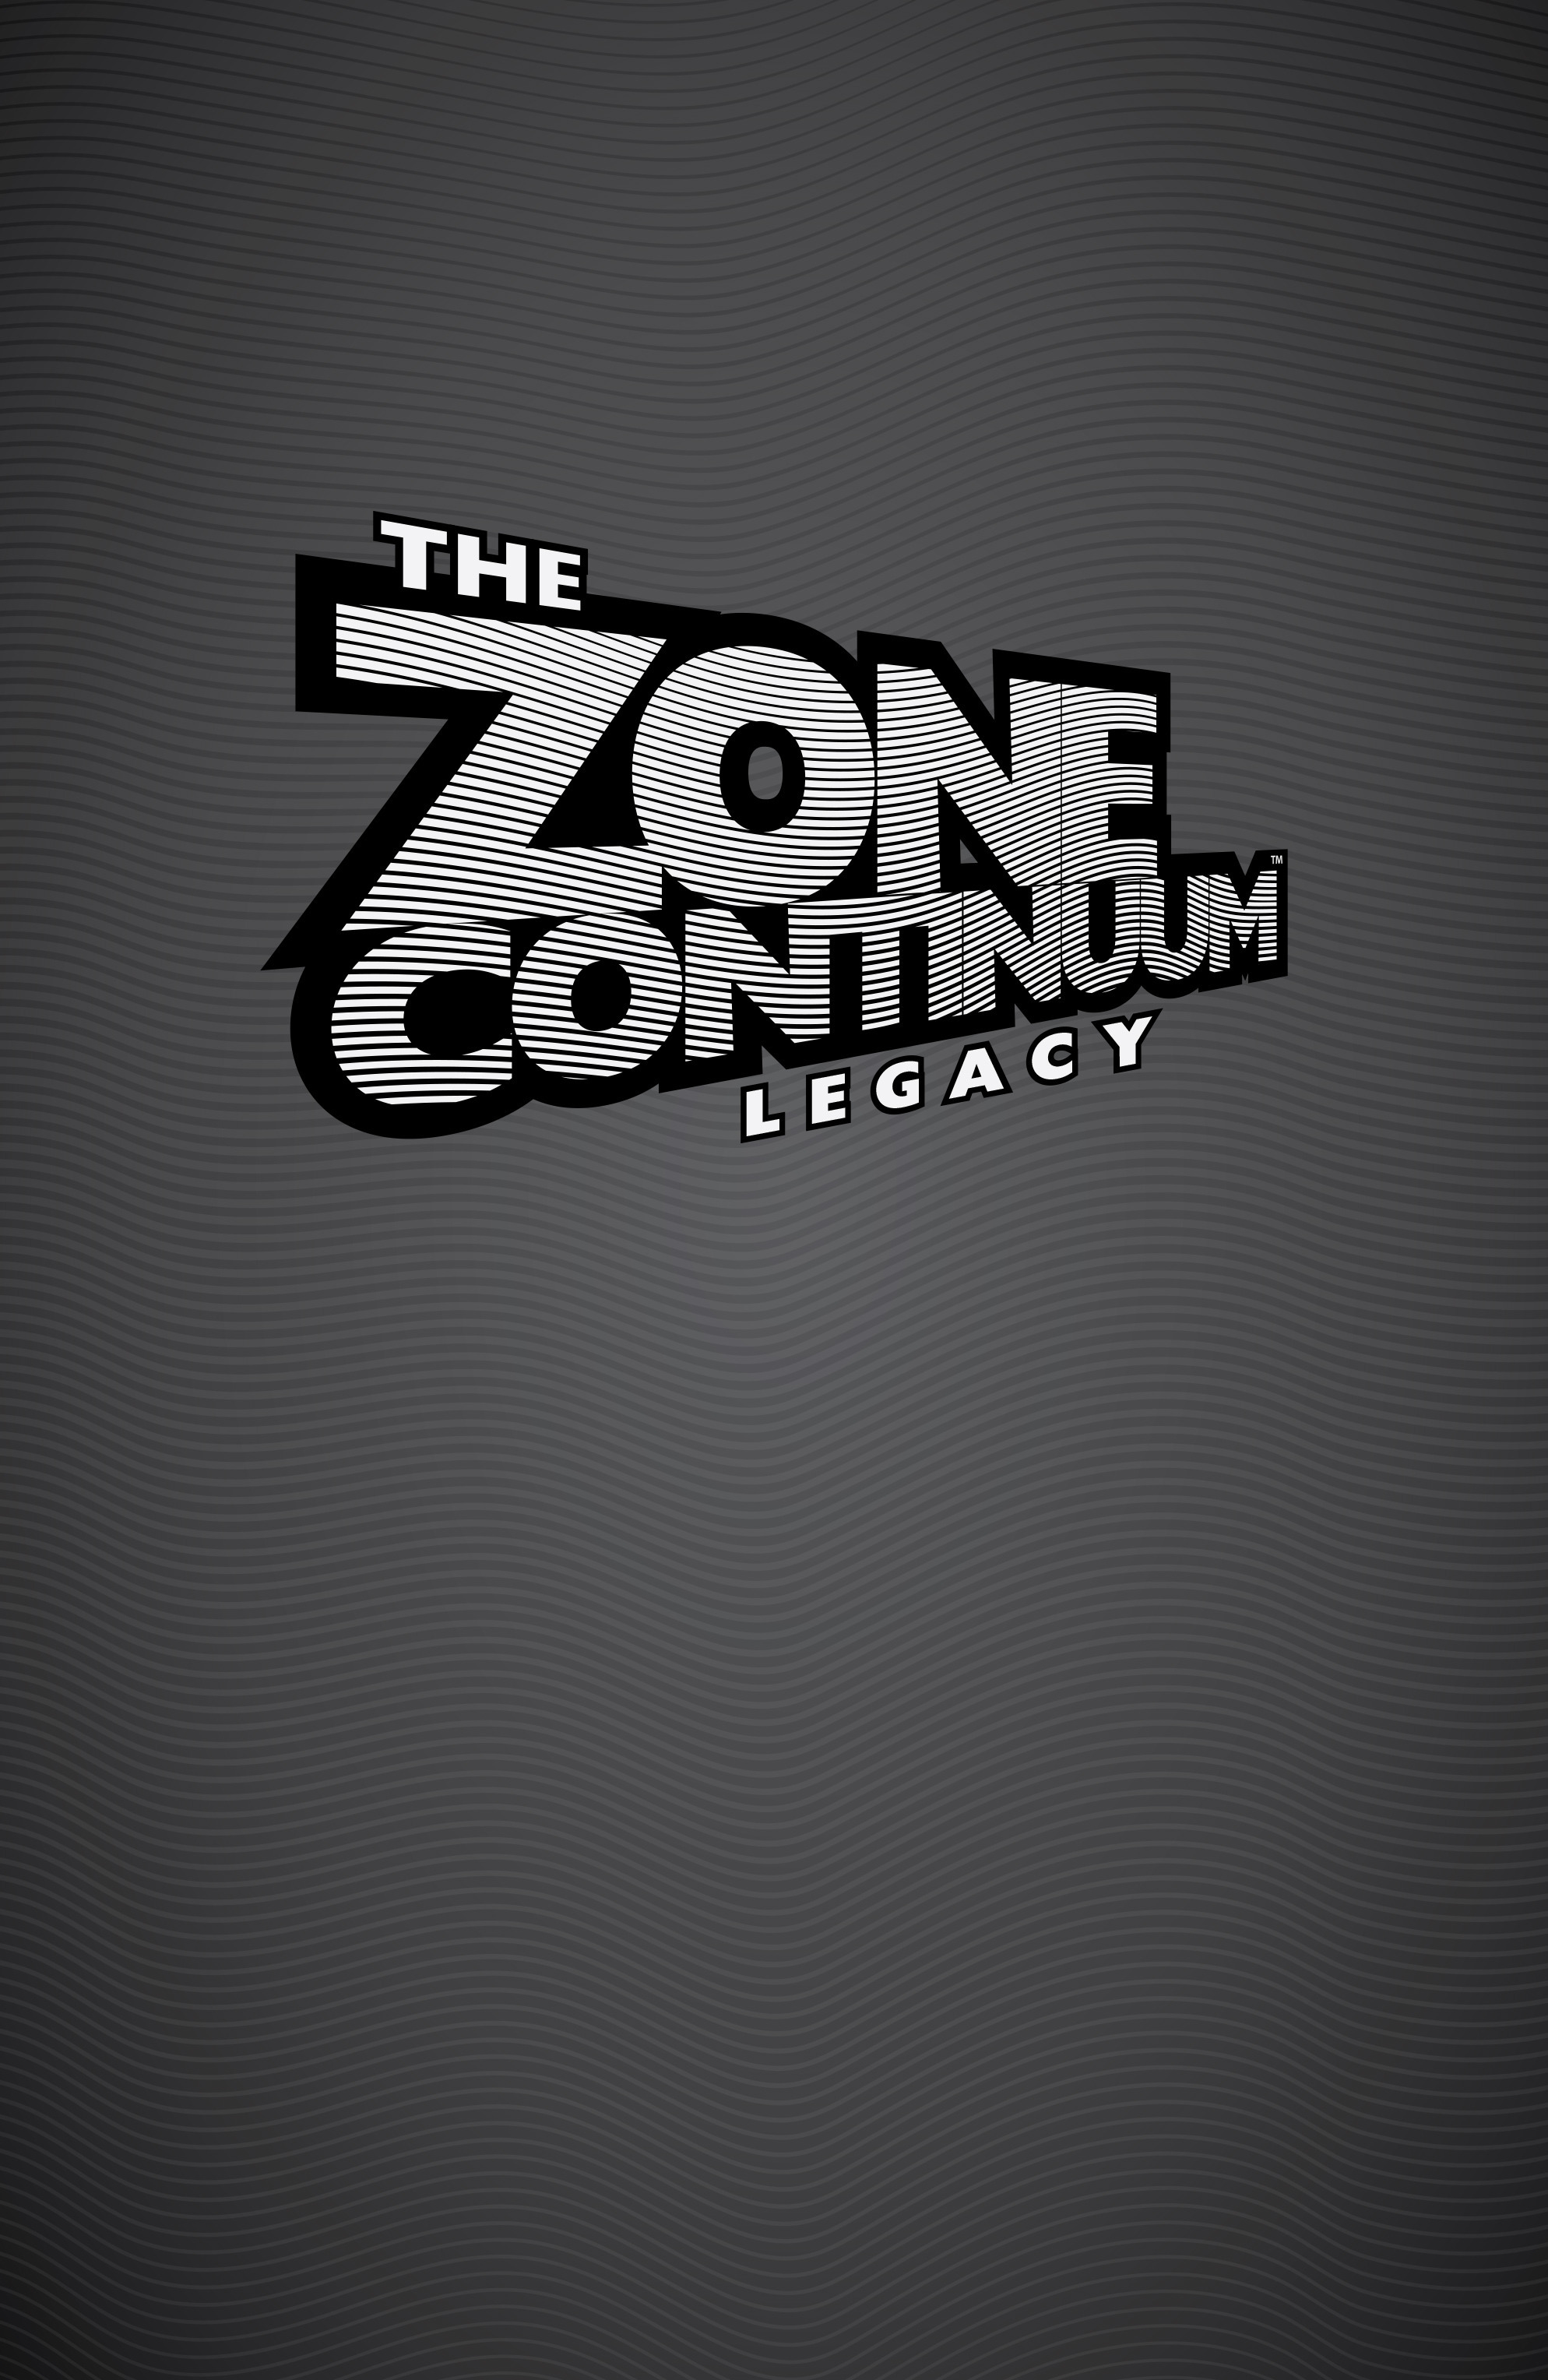 Read online The Zone Continuum: Legacy comic -  Issue # TPB - 3